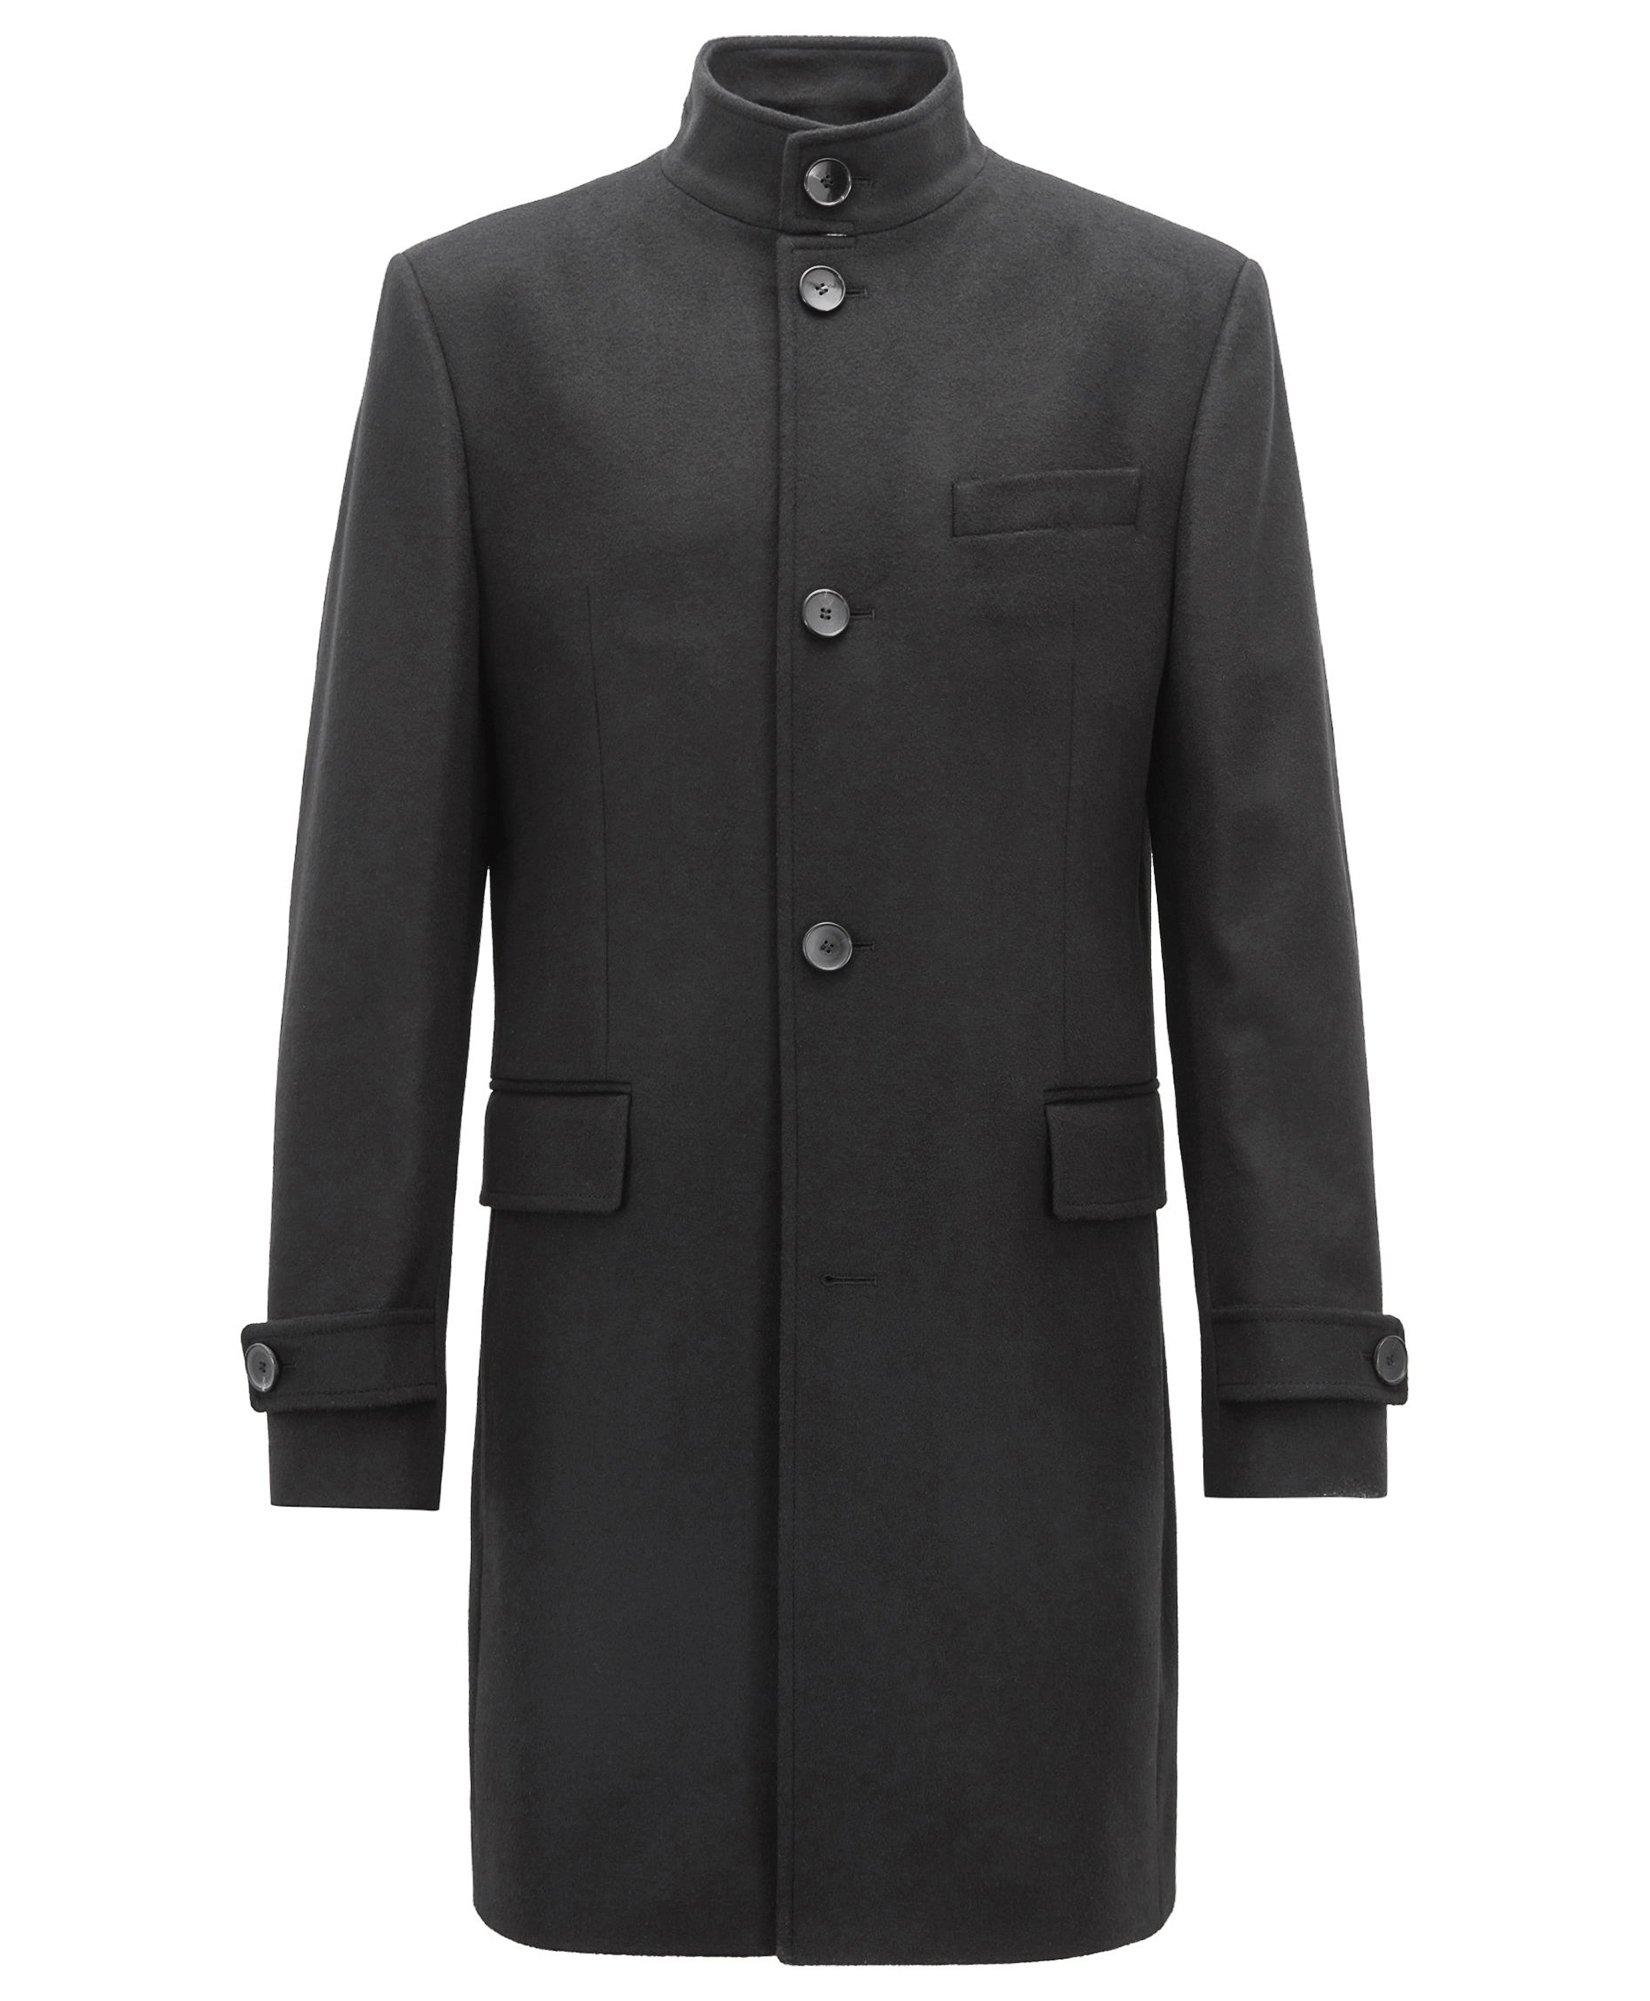 Wool & Cashmere Overcoat image 0